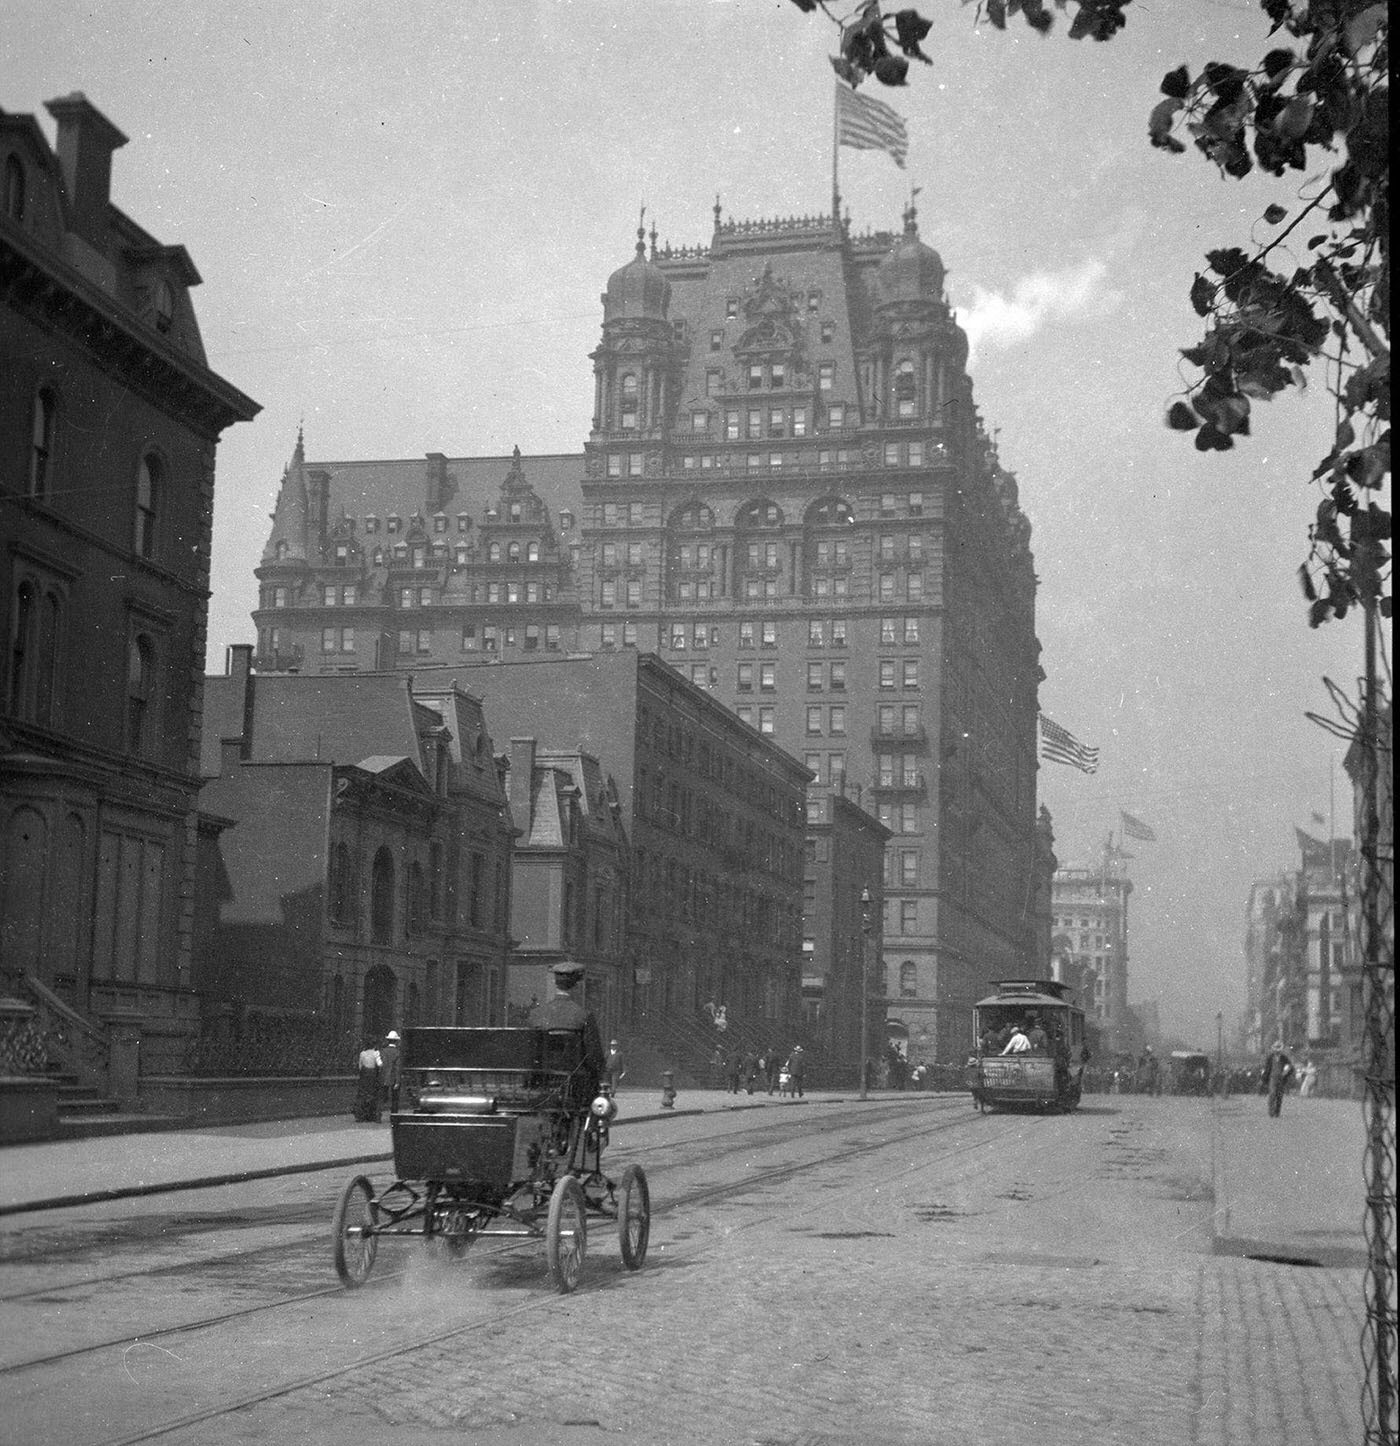 34Th Street Looking West Toward The Waldorf Astoria On Fifth Avenue, Early Automobile In Foreground, New York City, 1915